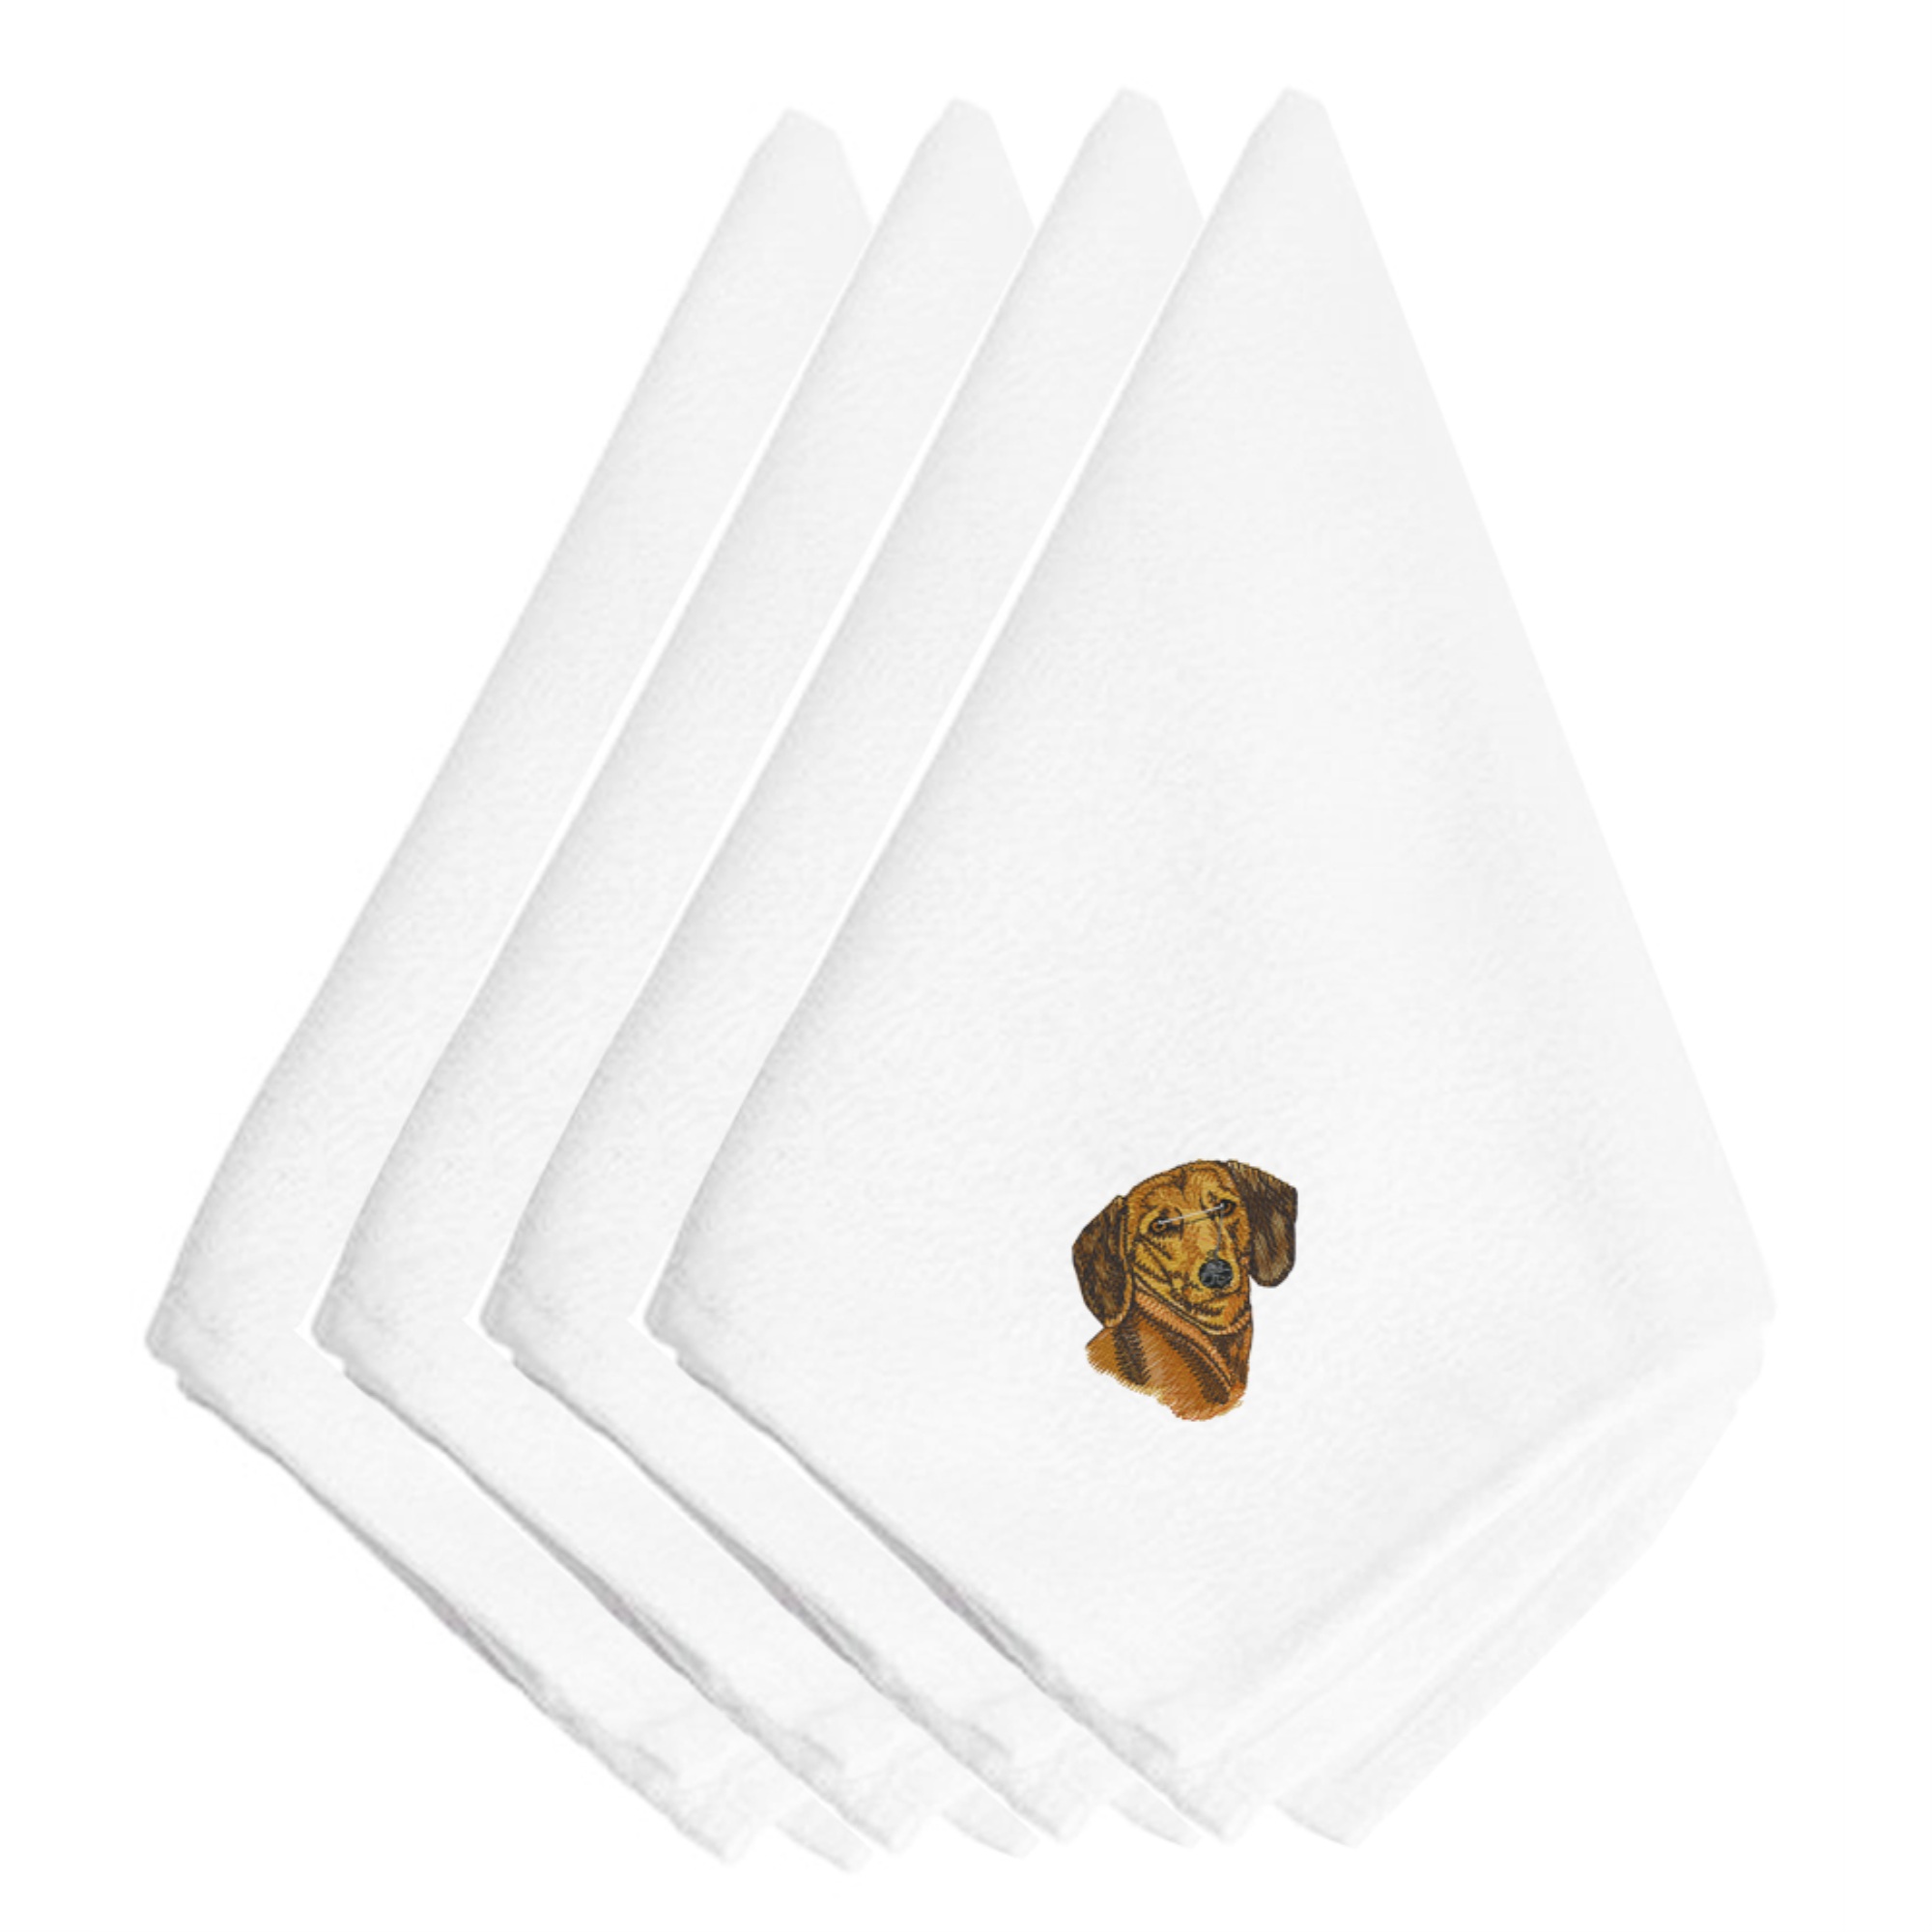 Caroline's Treasures "Caroline's Treasures EMBT2400NPKE Dachshund Embroidered Napkins (Set of 4), 20"", Multicolor"